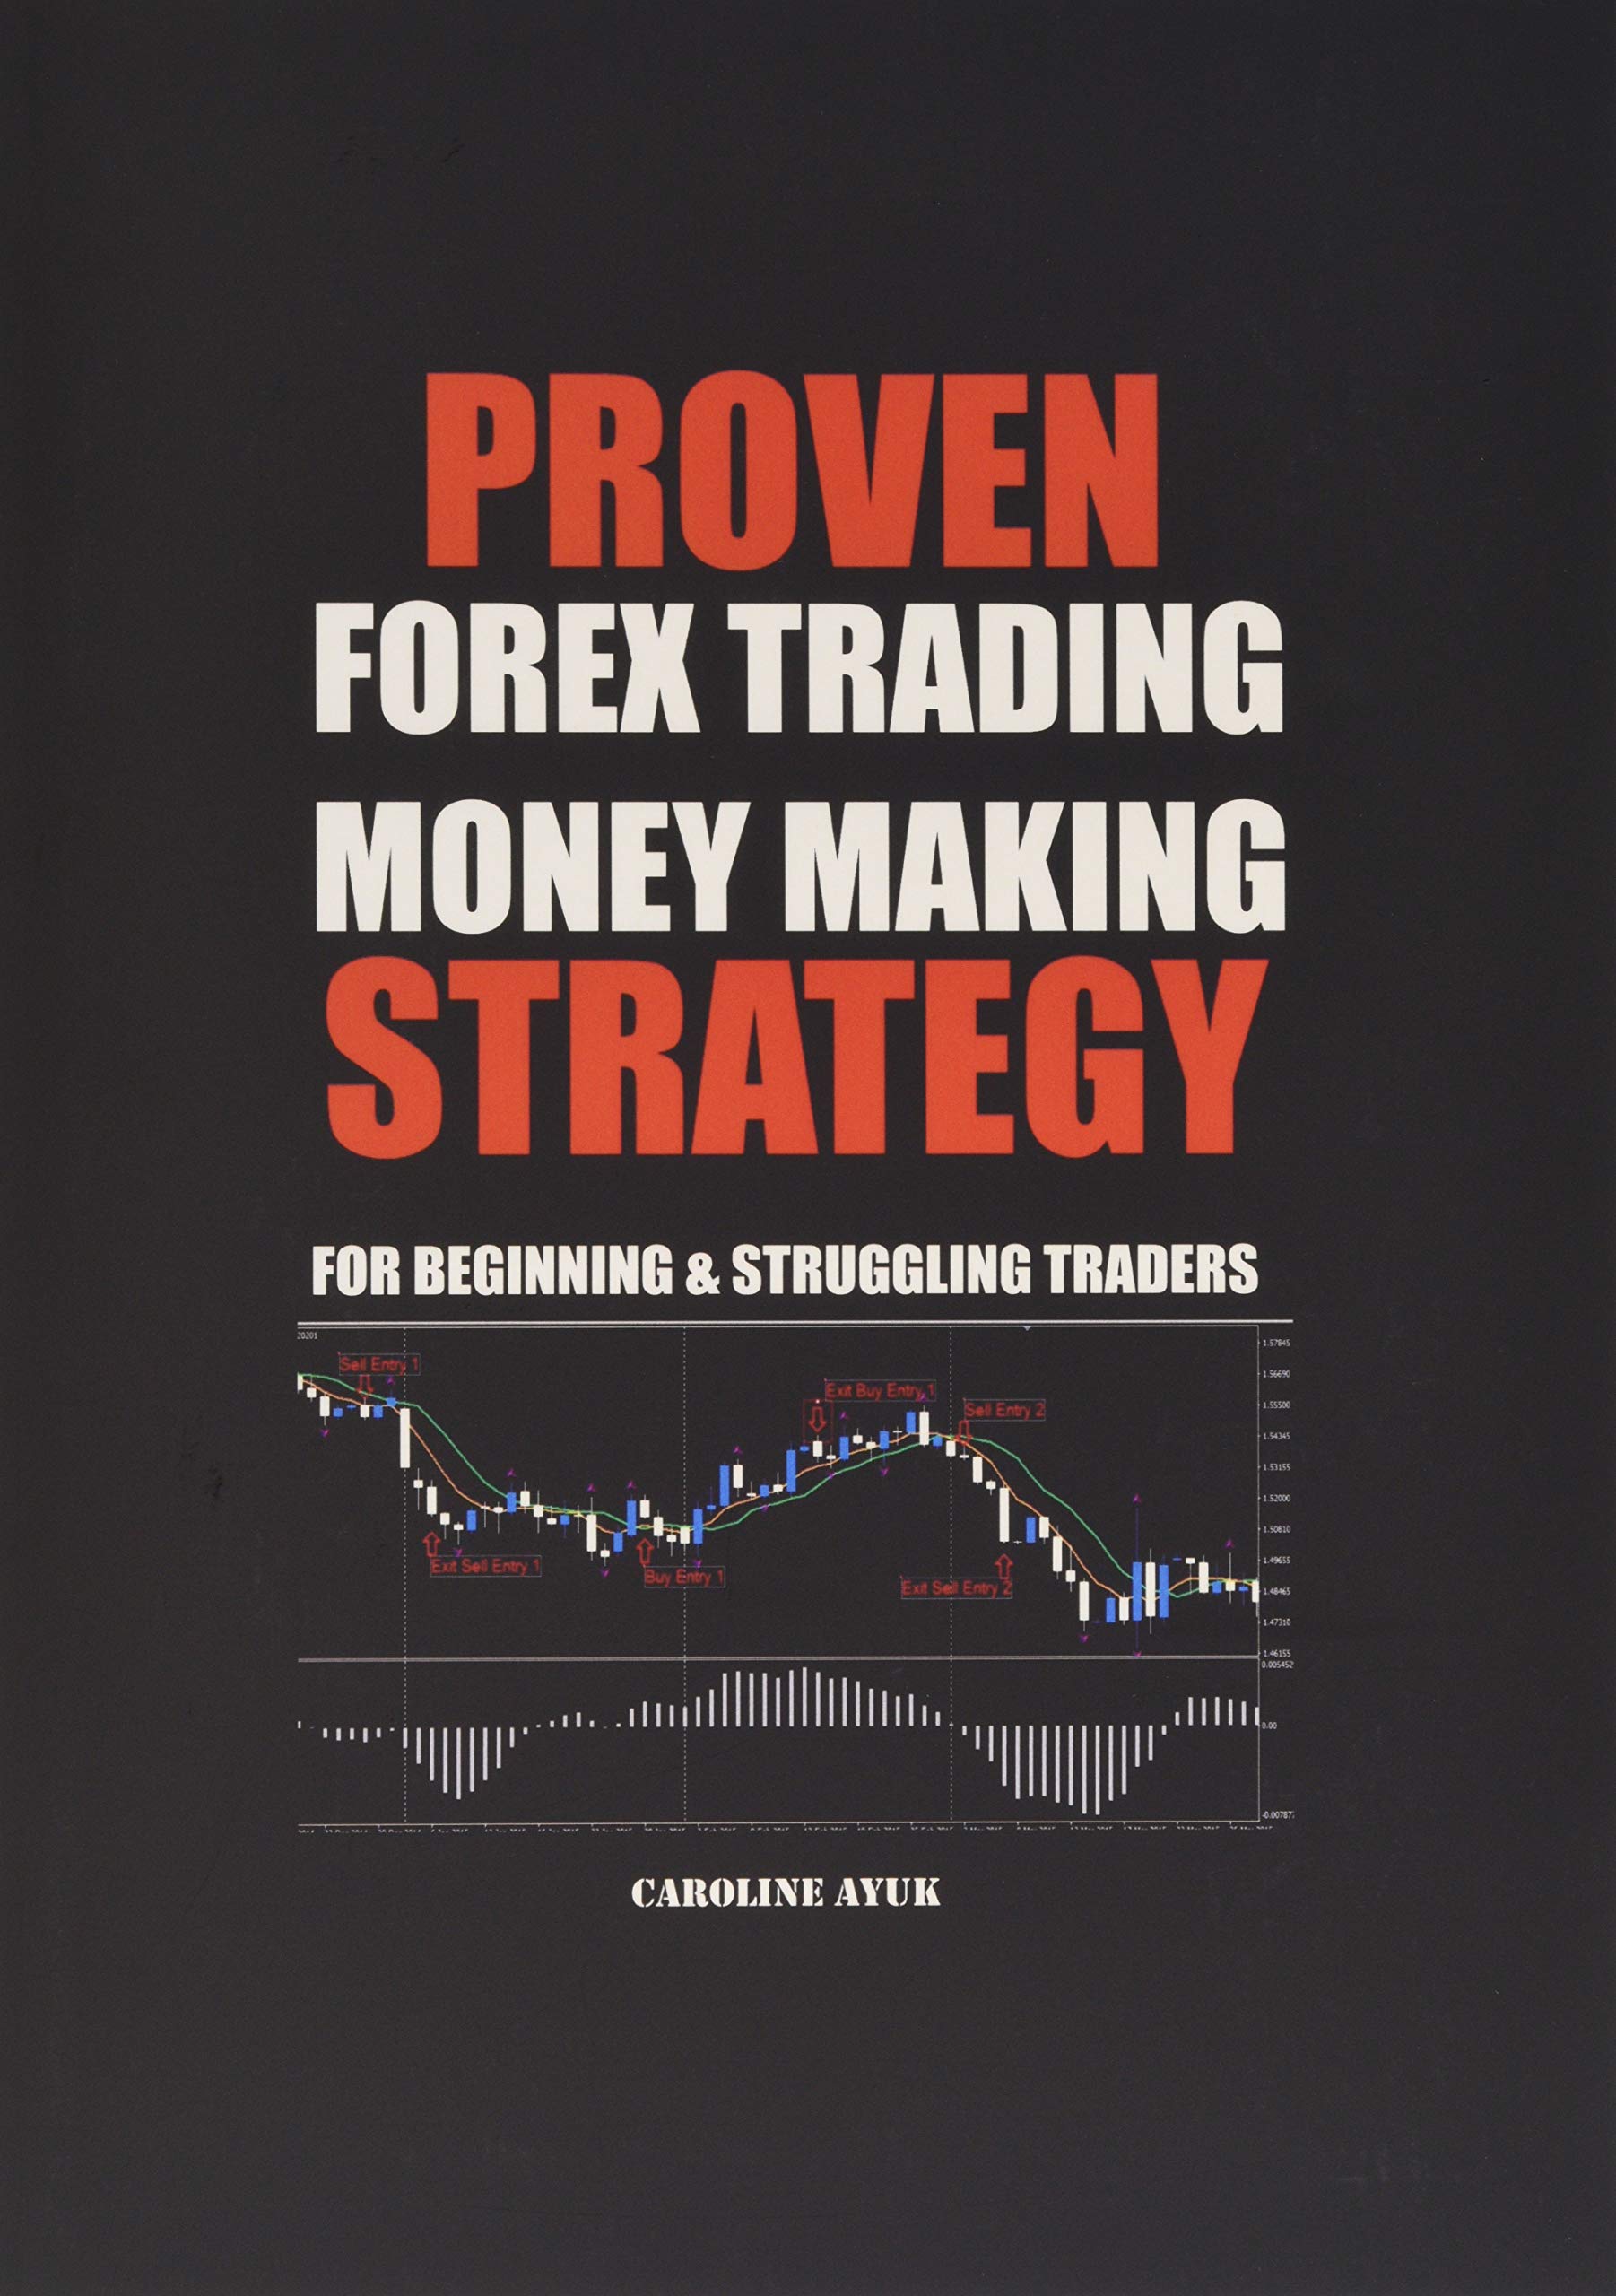 PROVEN FOREX TRADING MONEY MAKING STRATEGY - For Beginning ...